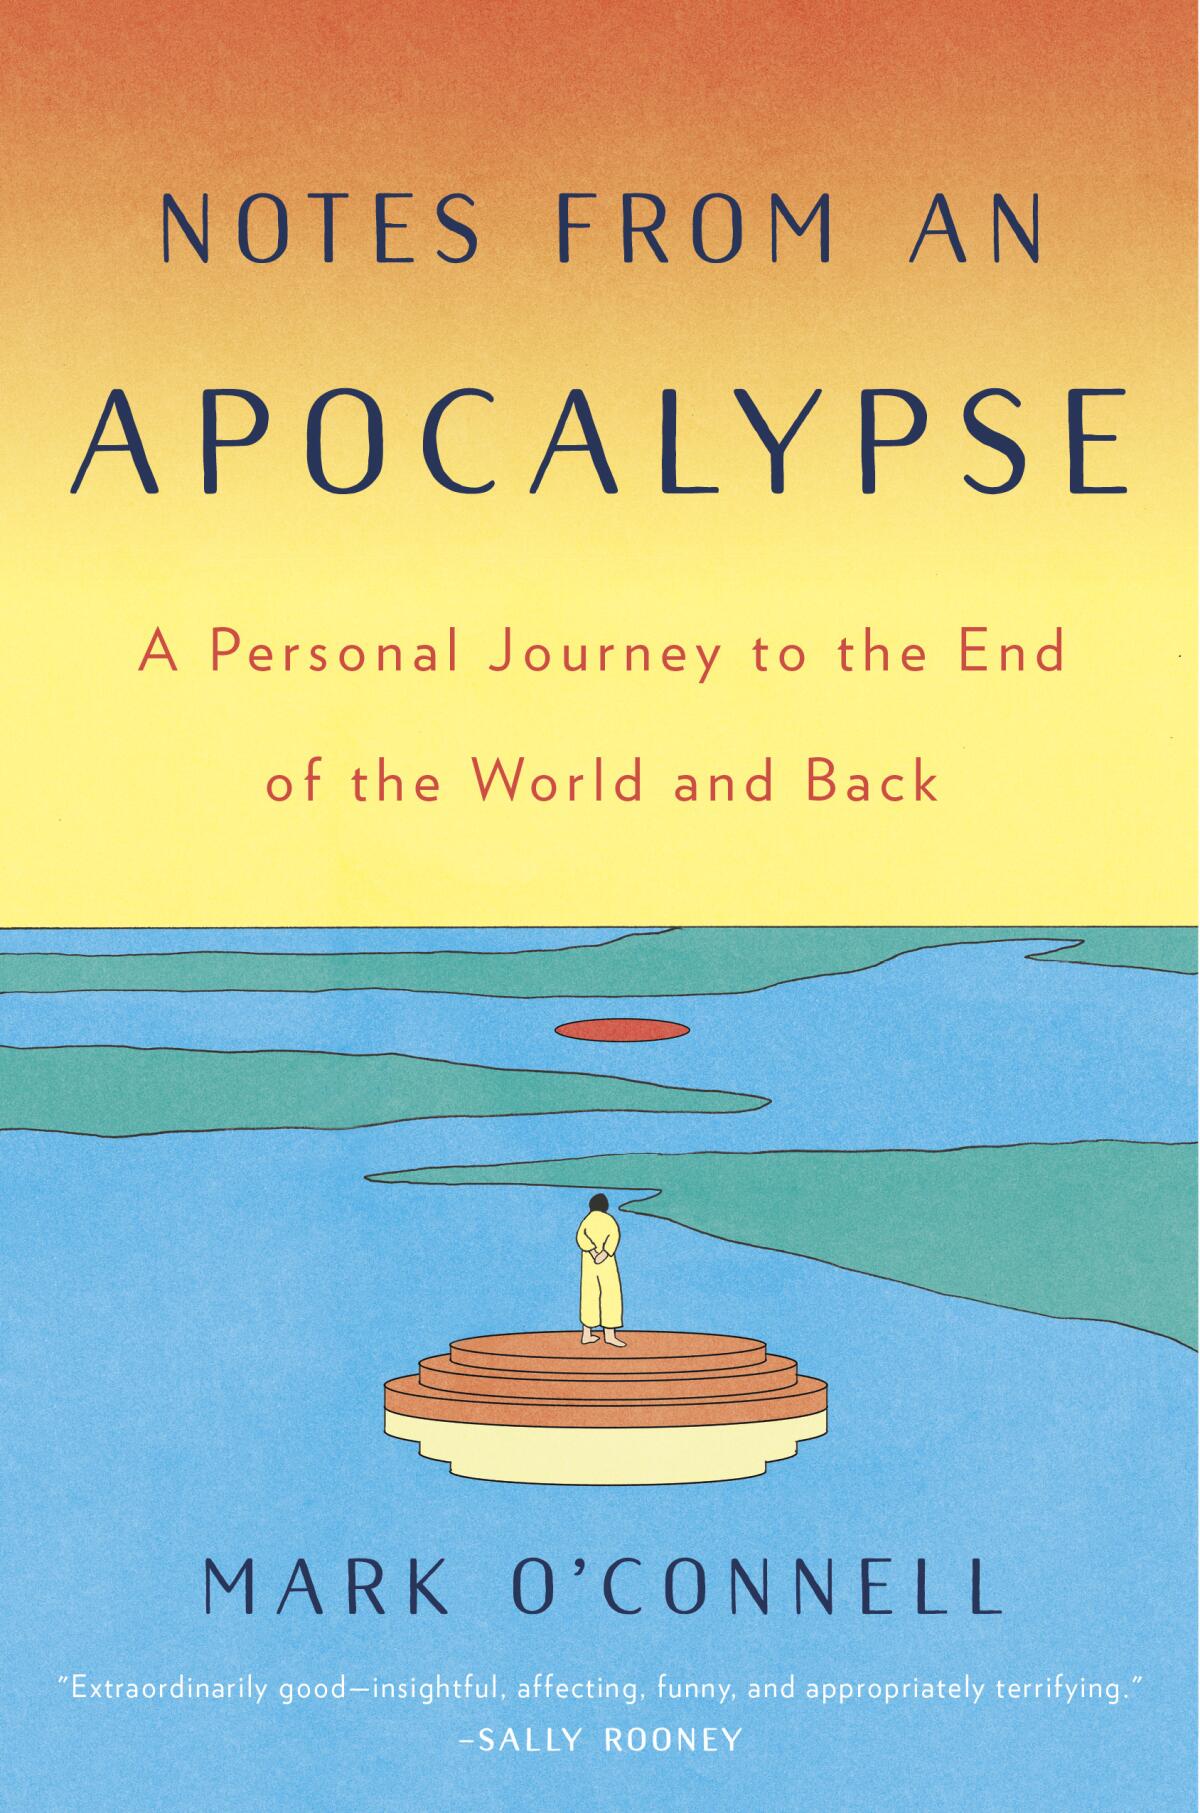 A book jacket for "Notes From an Apocalypse," by Mark O'Connell.